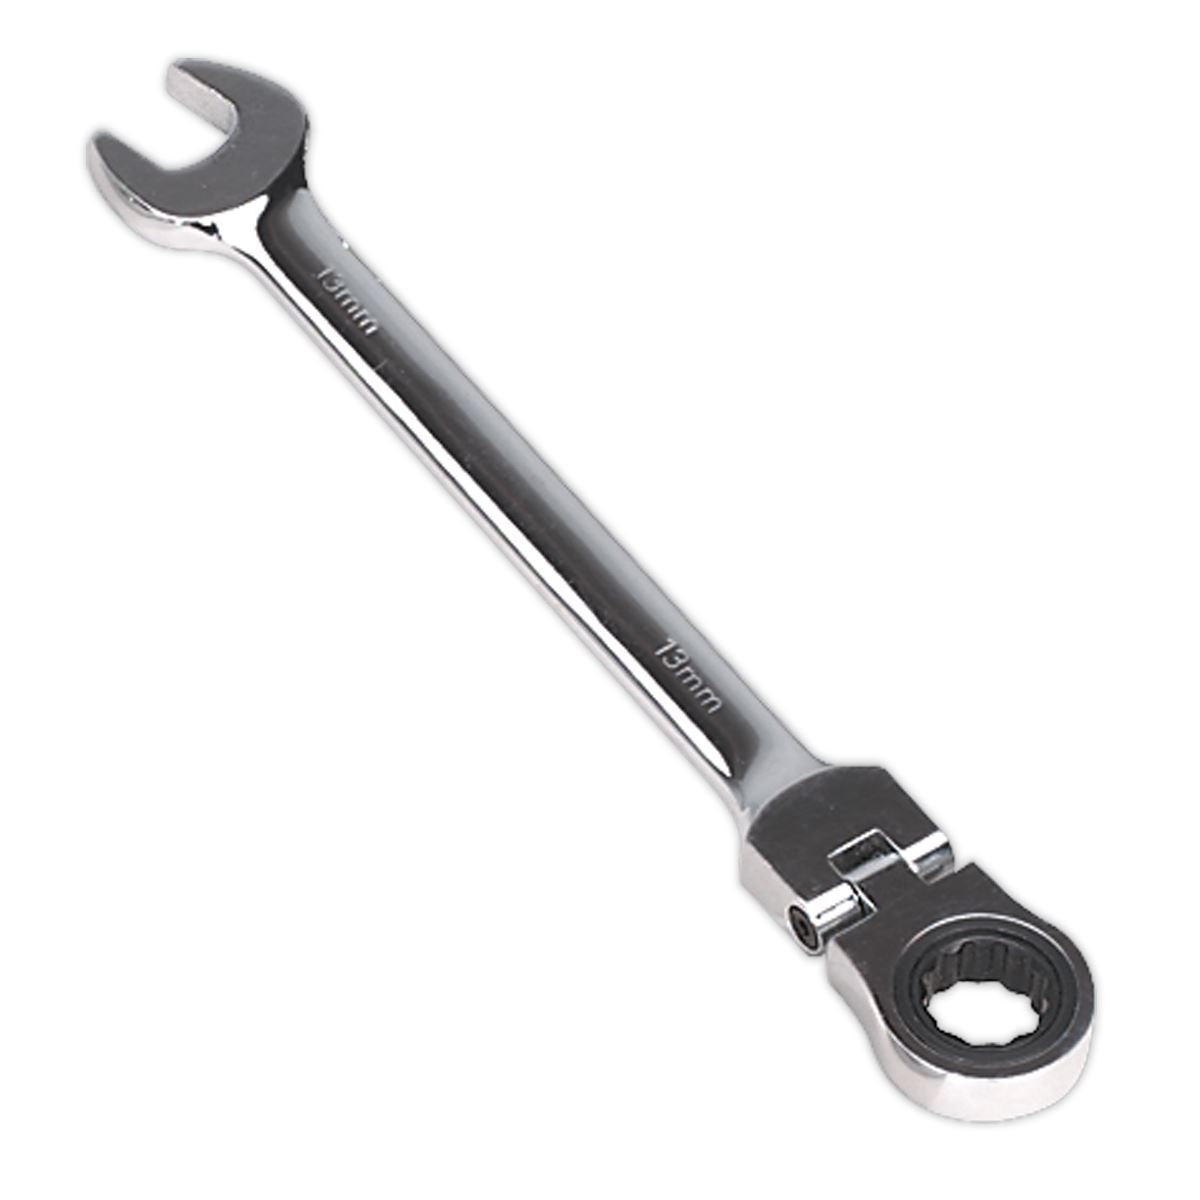 Sealey Flexi Head Ratchet Combination Spanner Open End Ring Individual